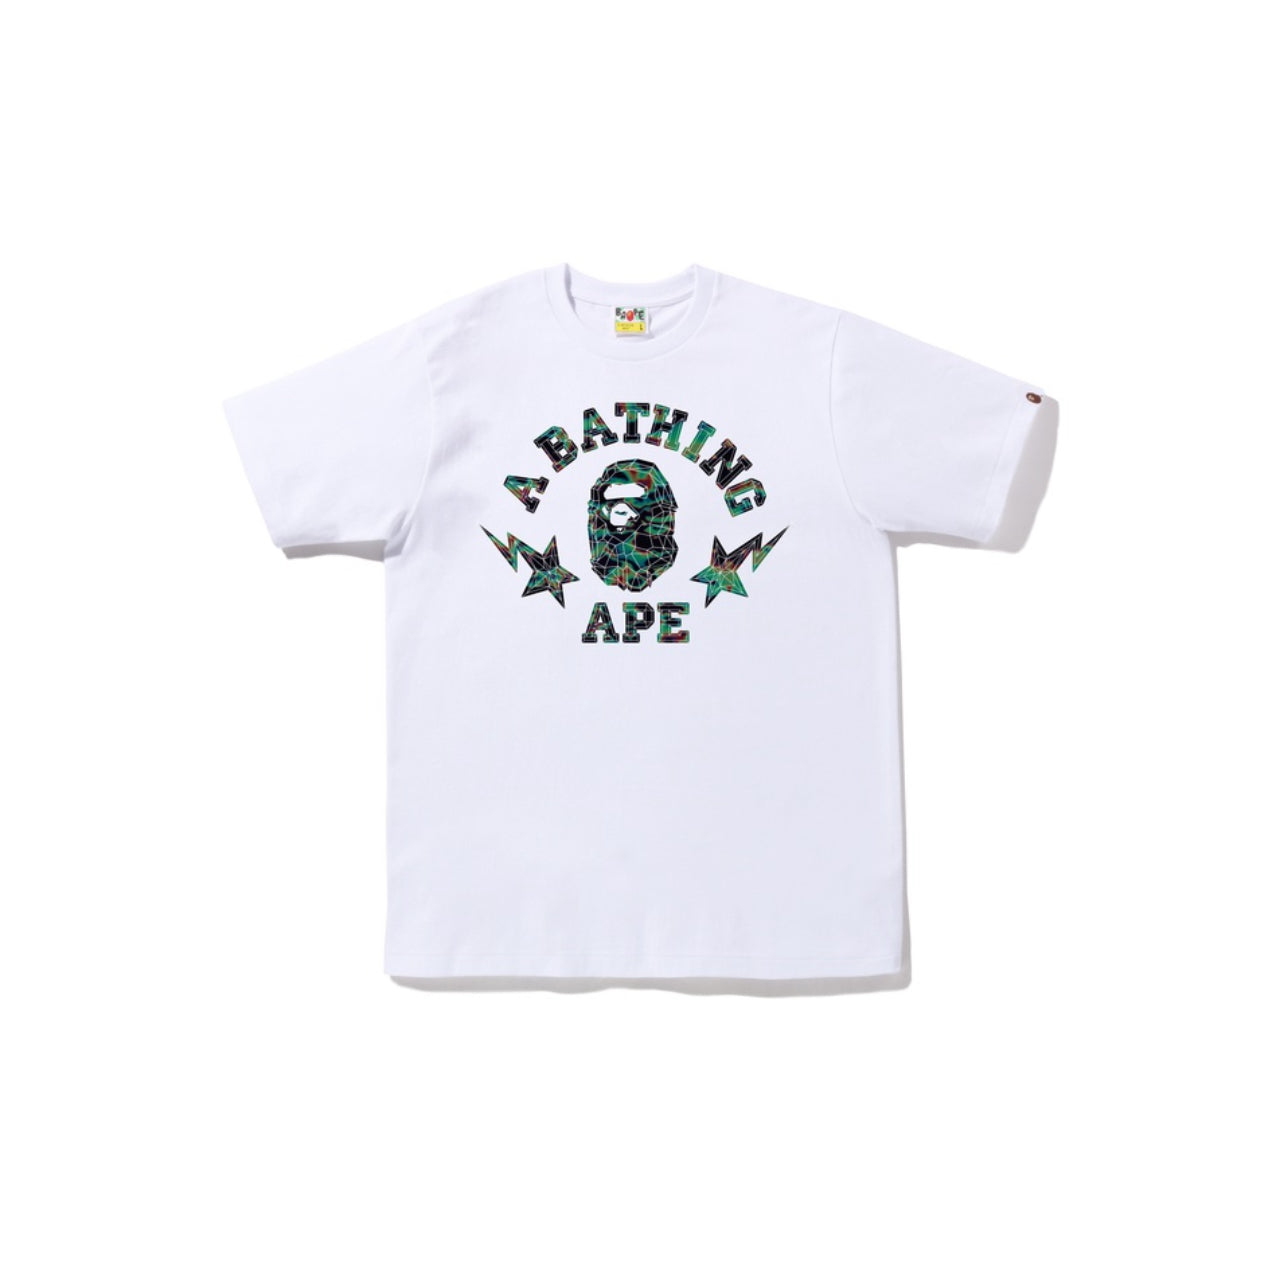 BAPE Thermography Polygon College Tee White